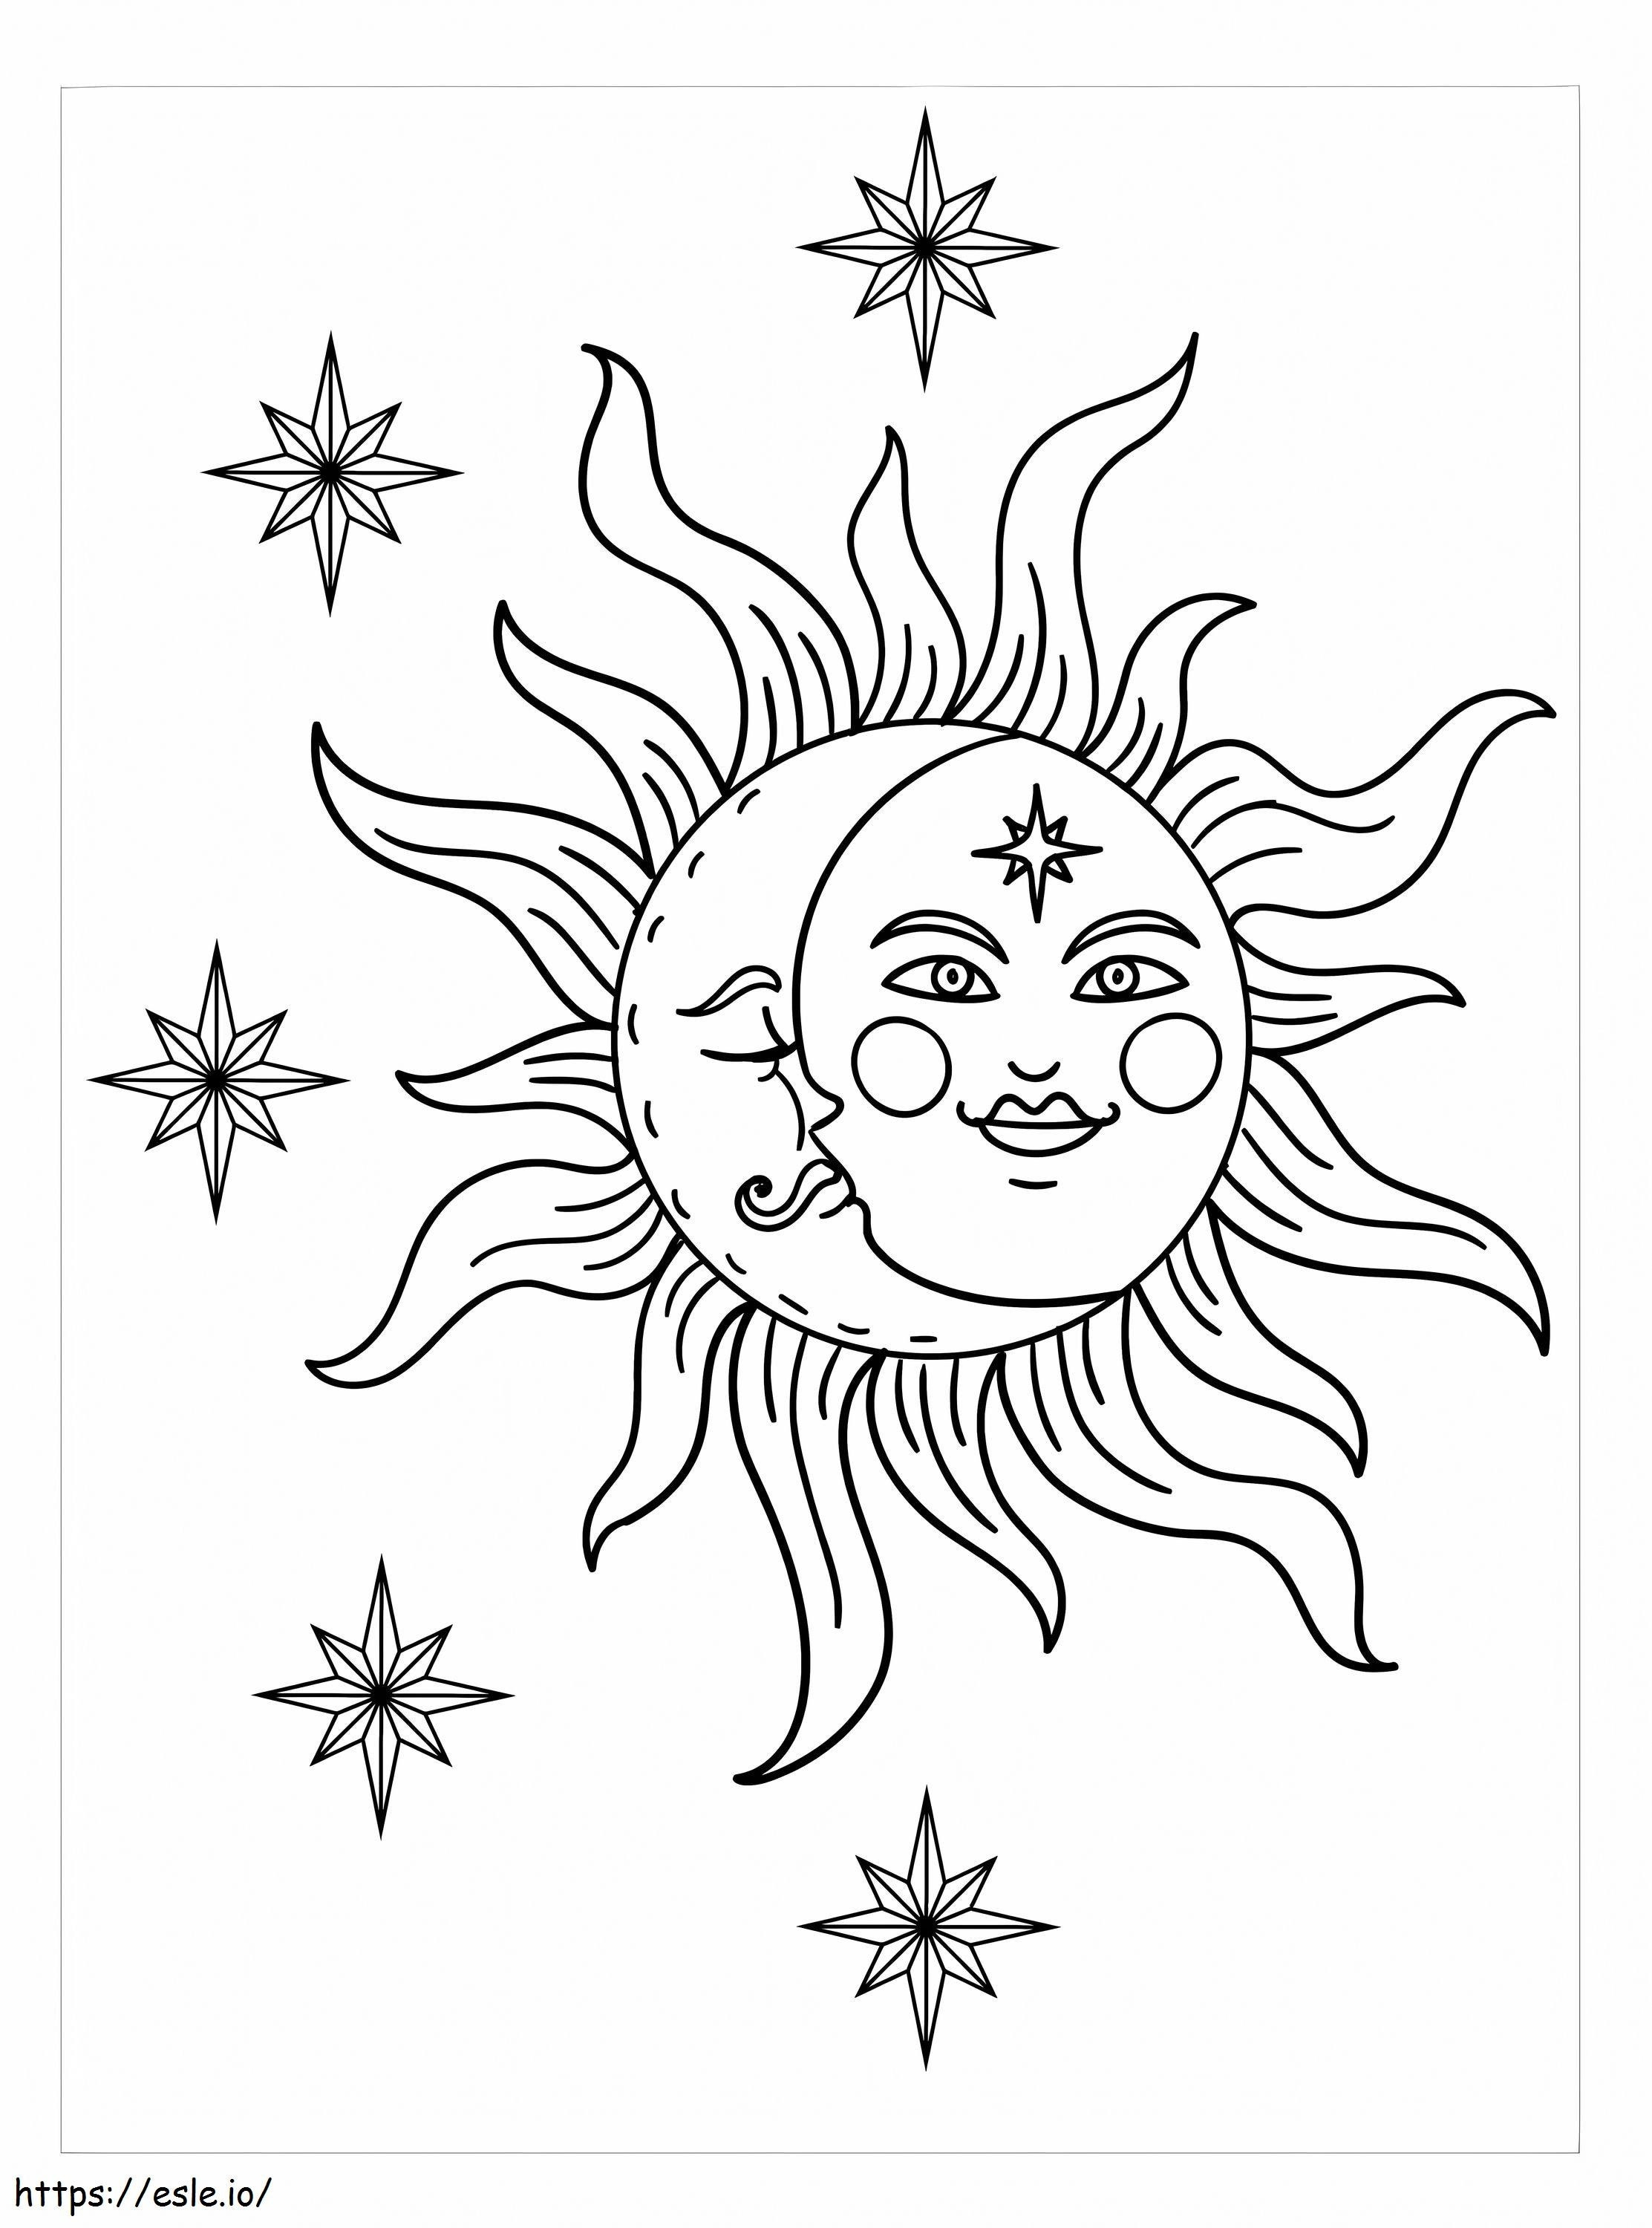 Vintage Sun And Moon coloring page